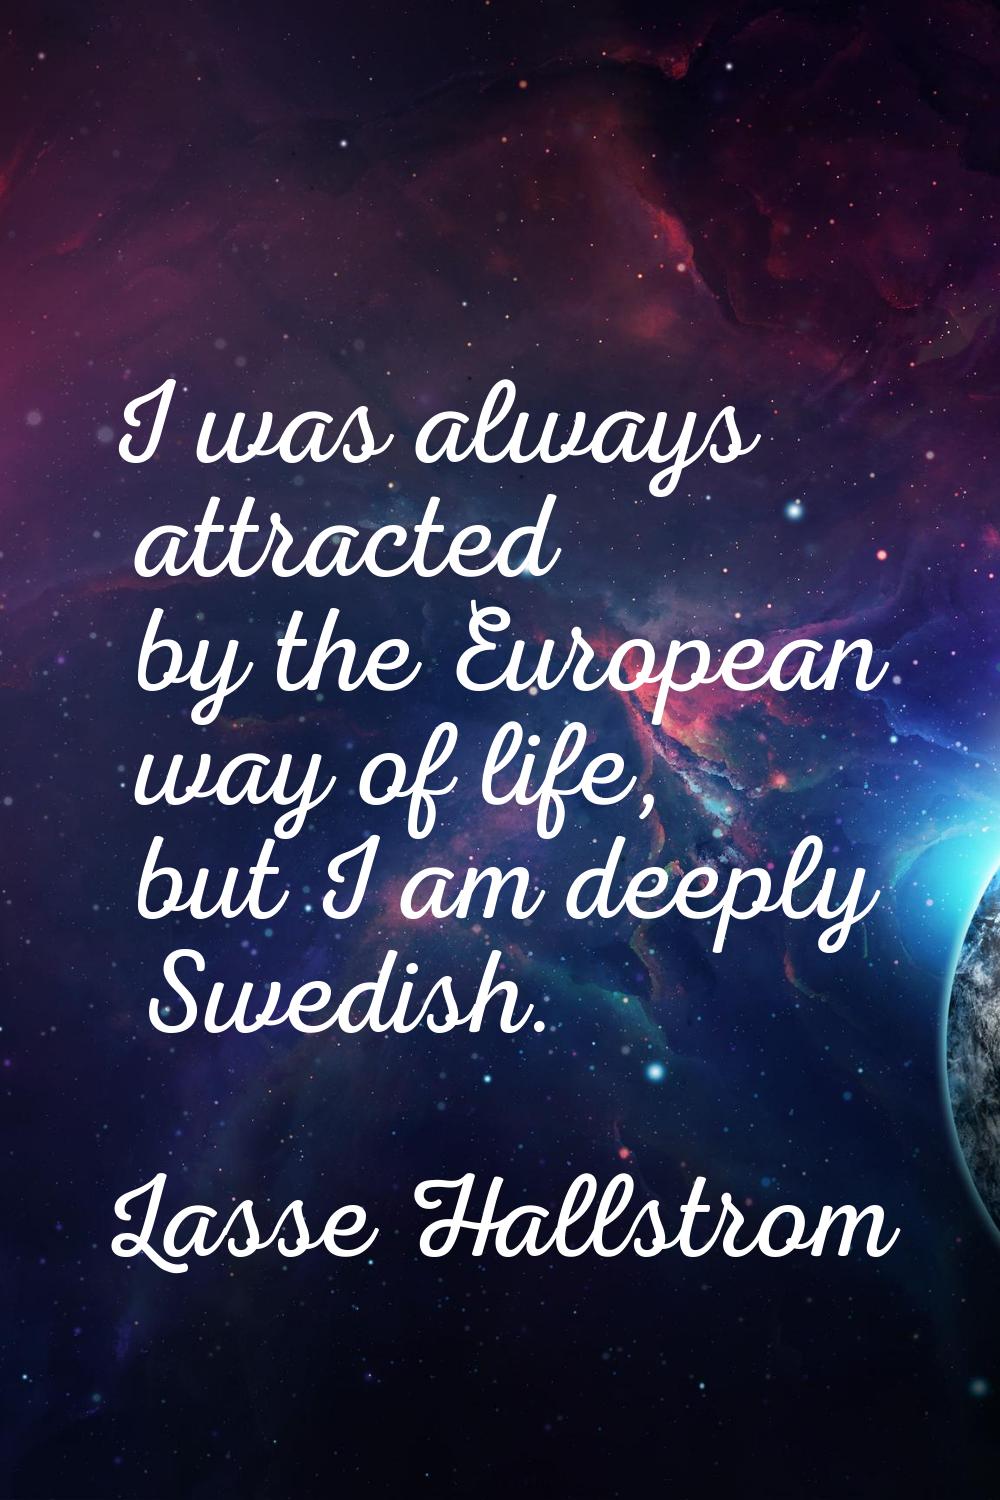 I was always attracted by the European way of life, but I am deeply Swedish.